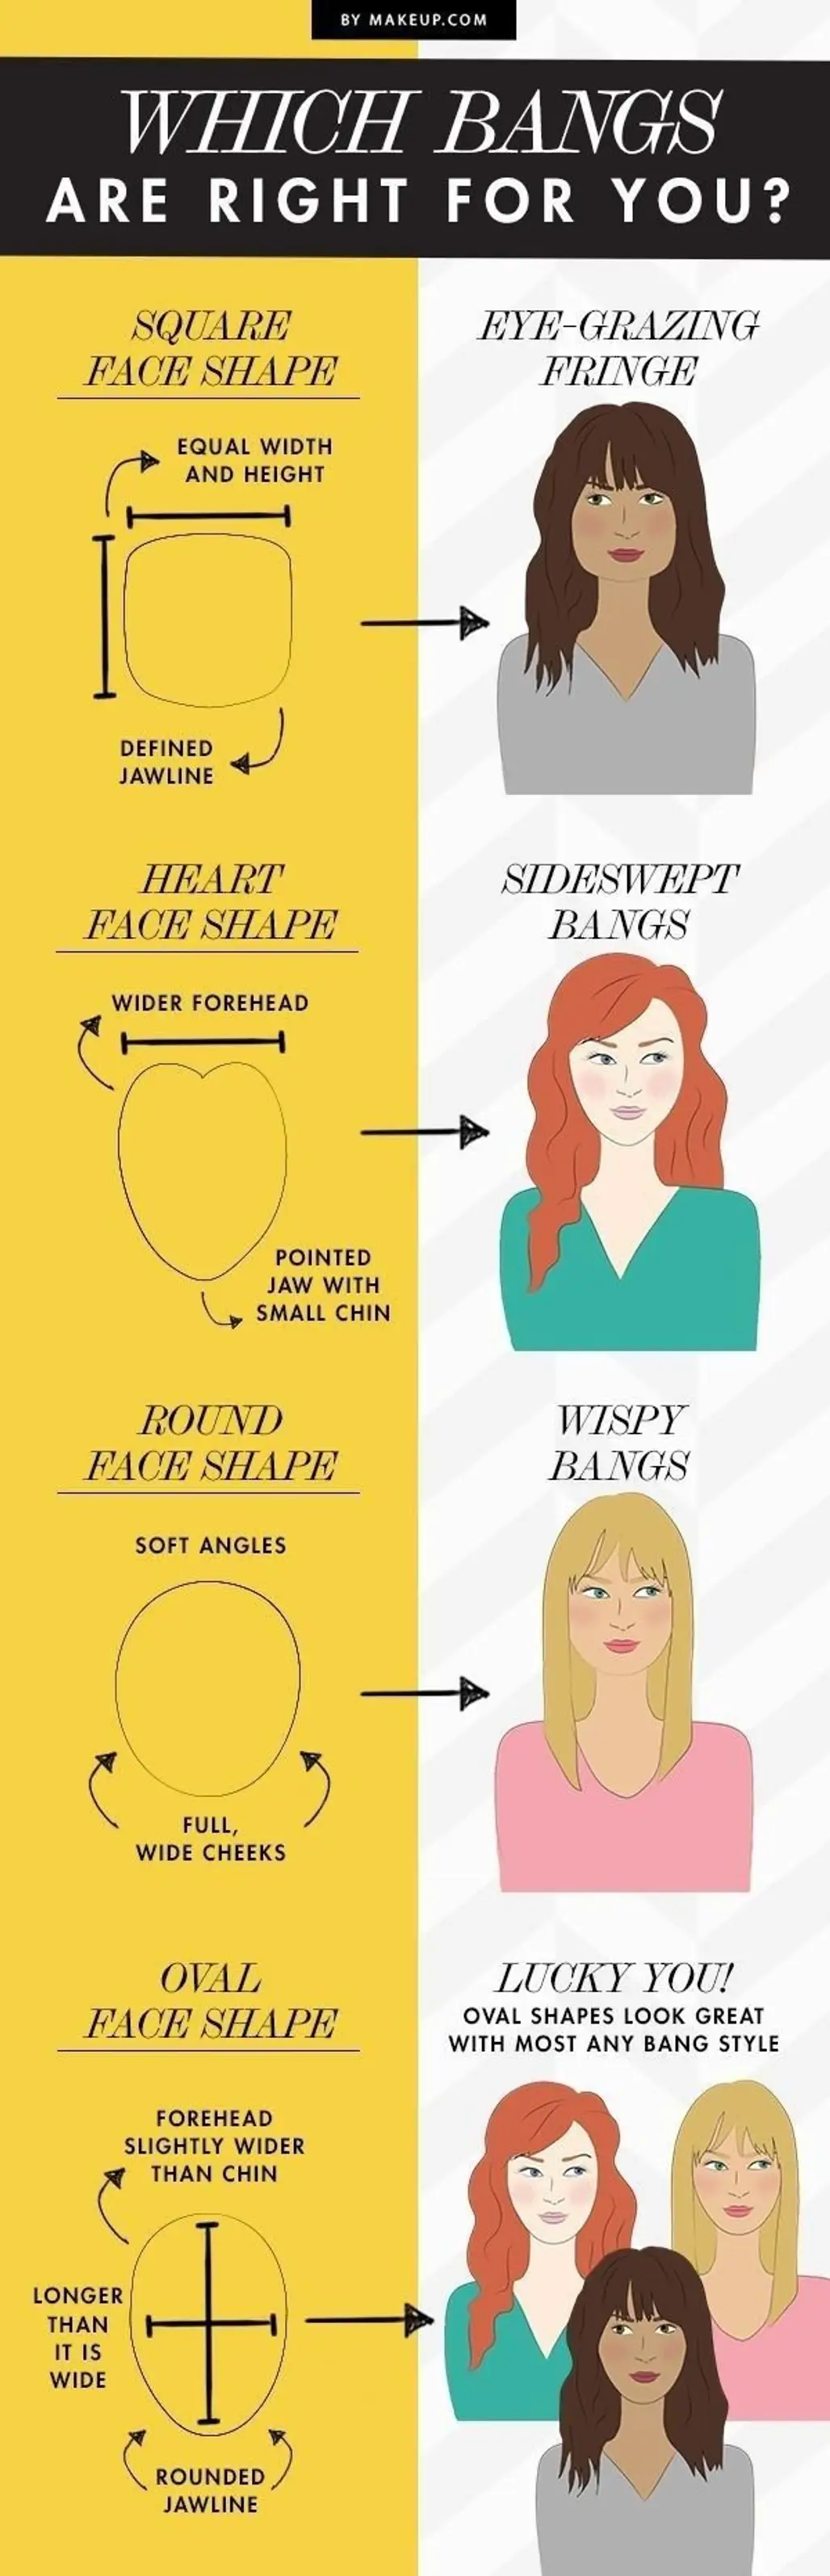 Which Bangs Are Right for You?